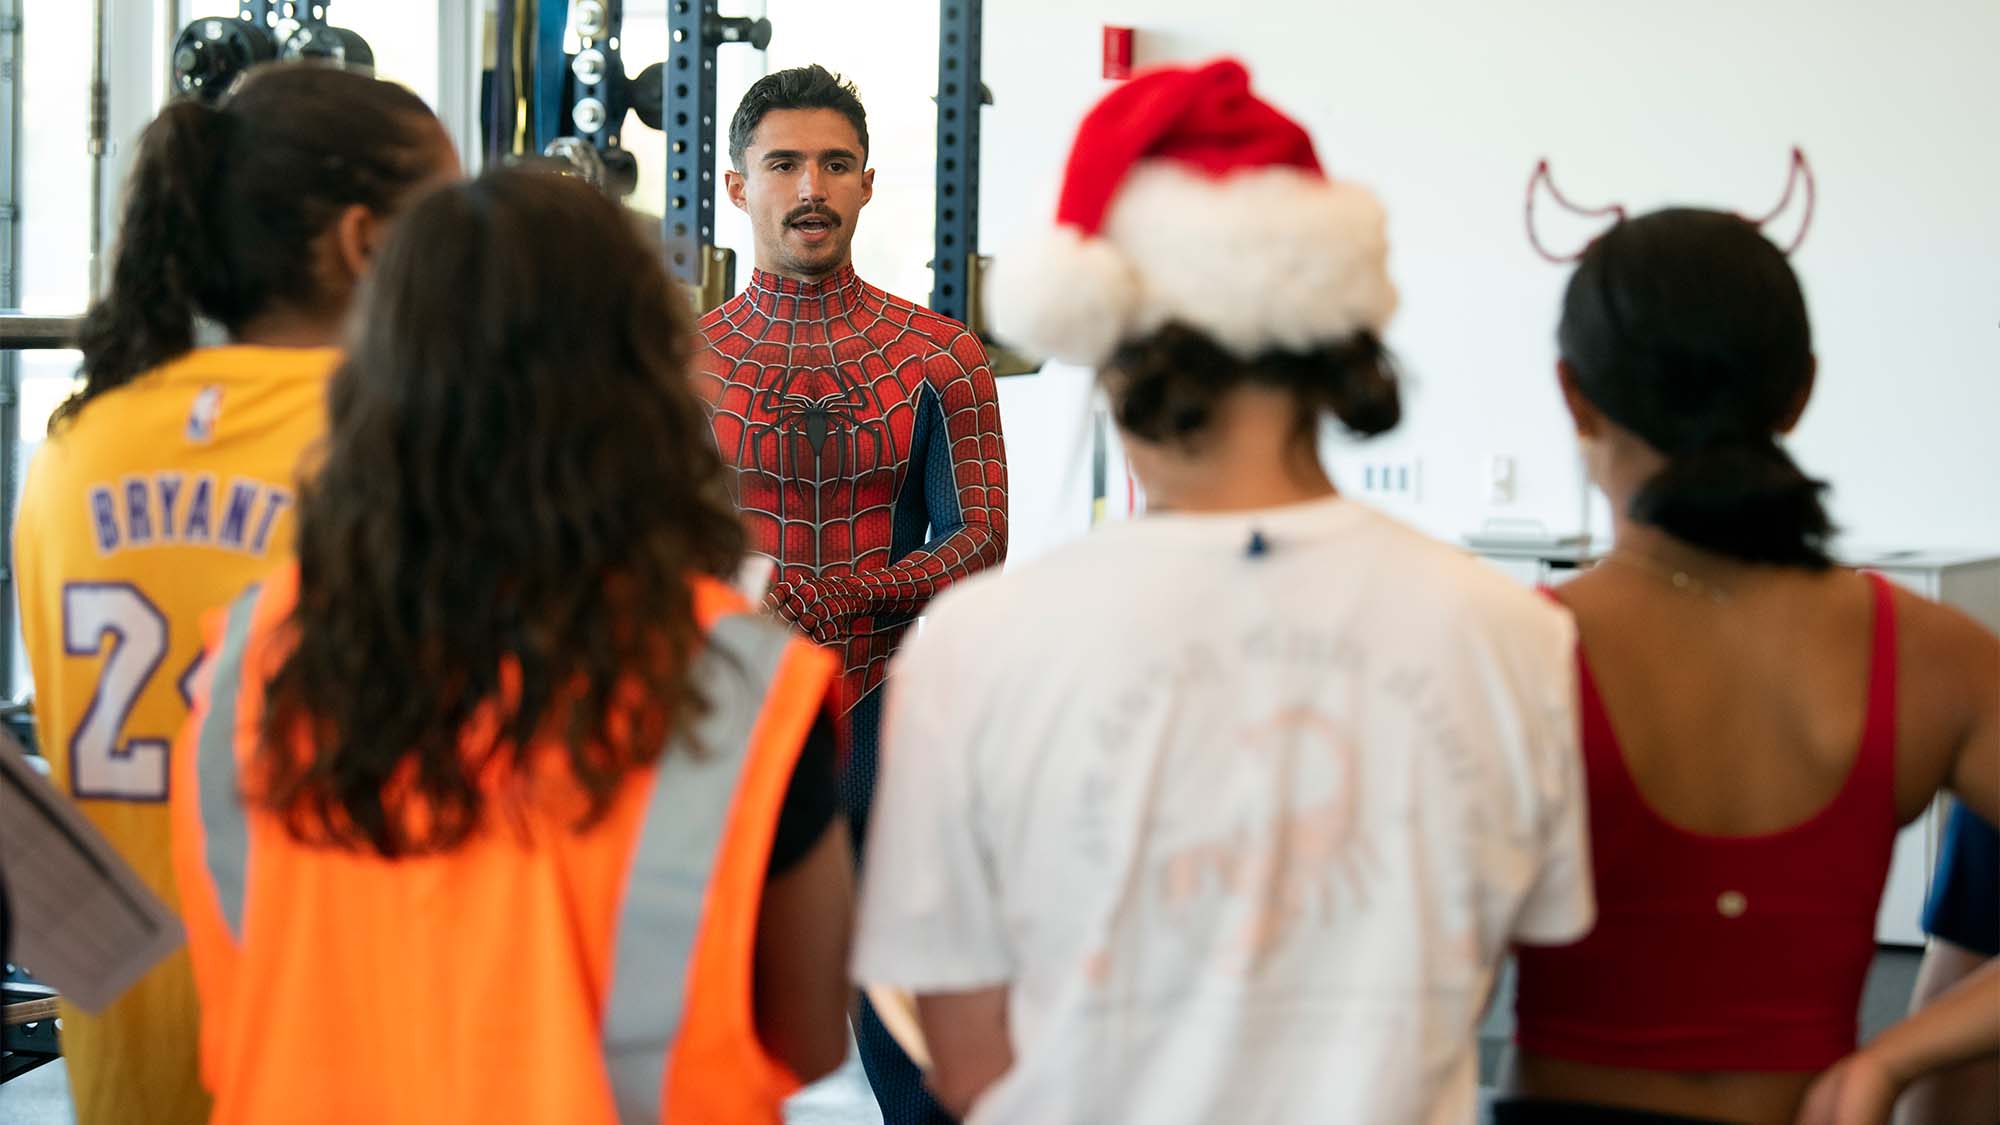 Coach in Spider-Man costume talks to student-athletes in Halloween costumes in weight room